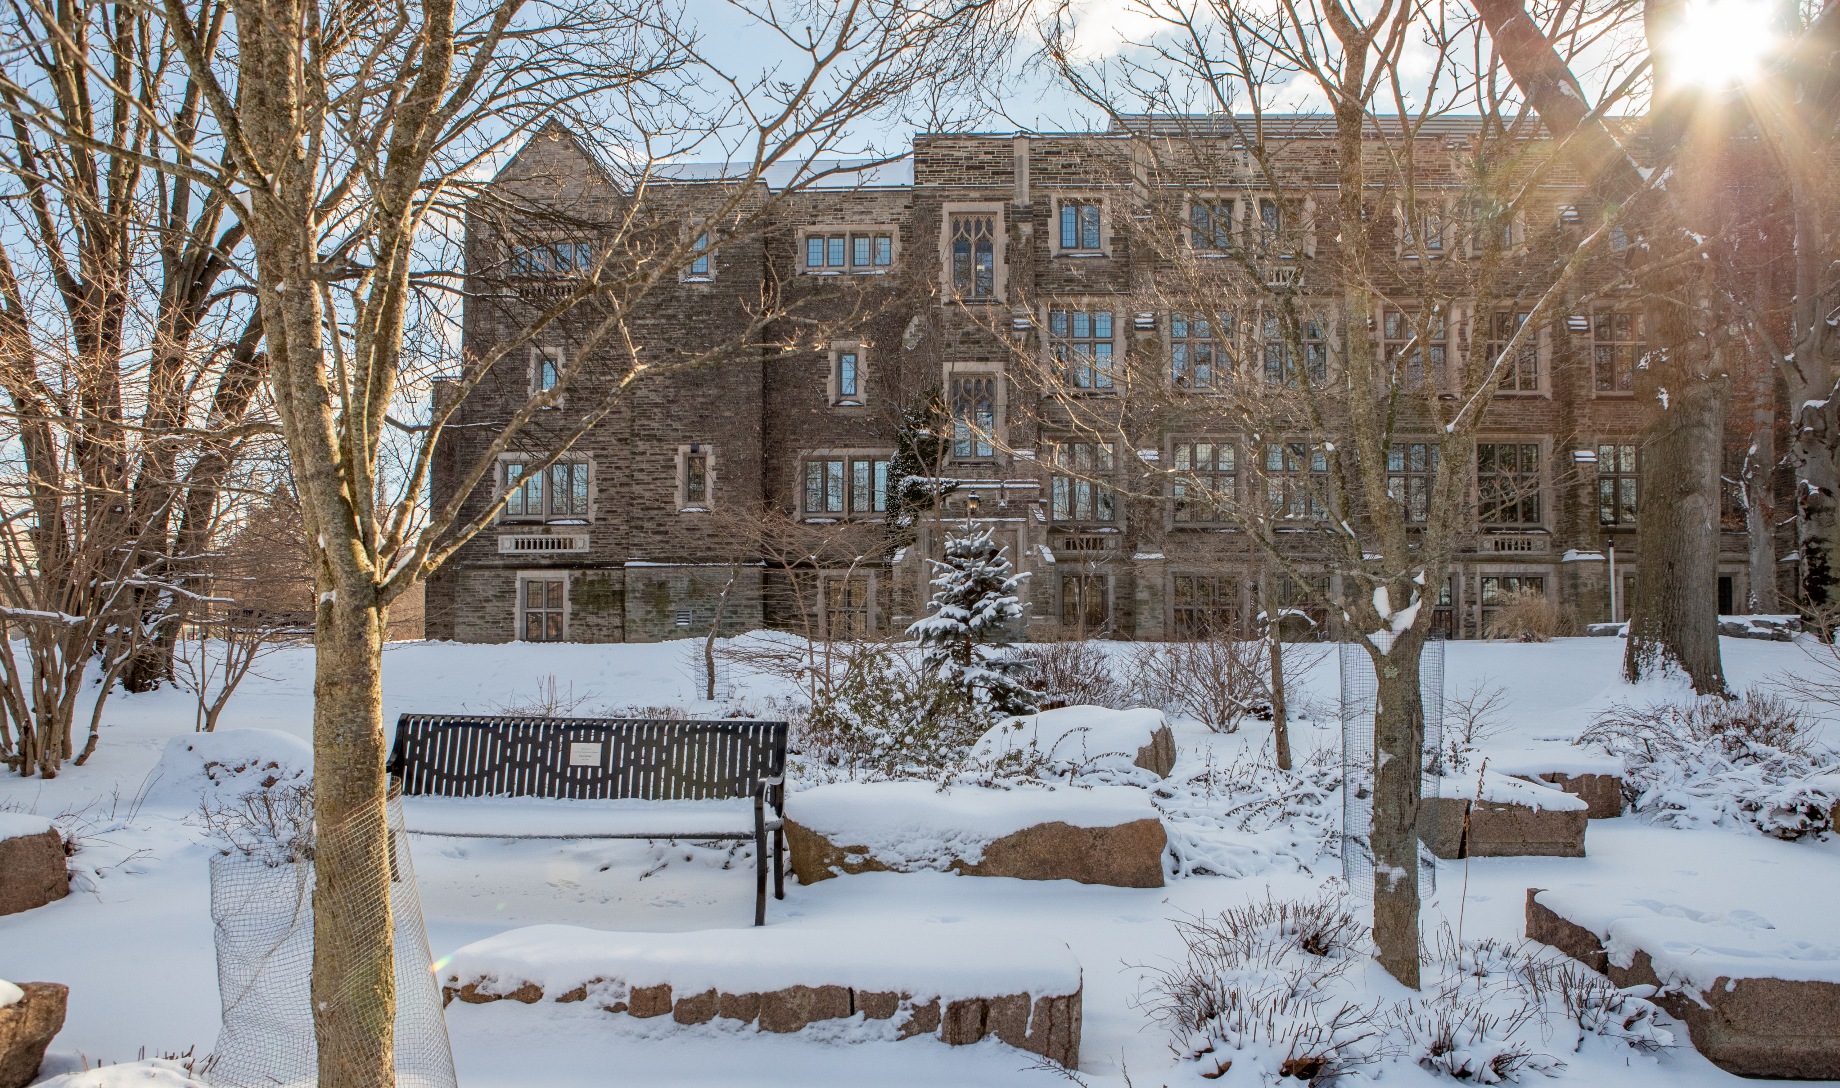 A sunny afternoon in snowy Faculty Hollow outside Hamilton Hall.